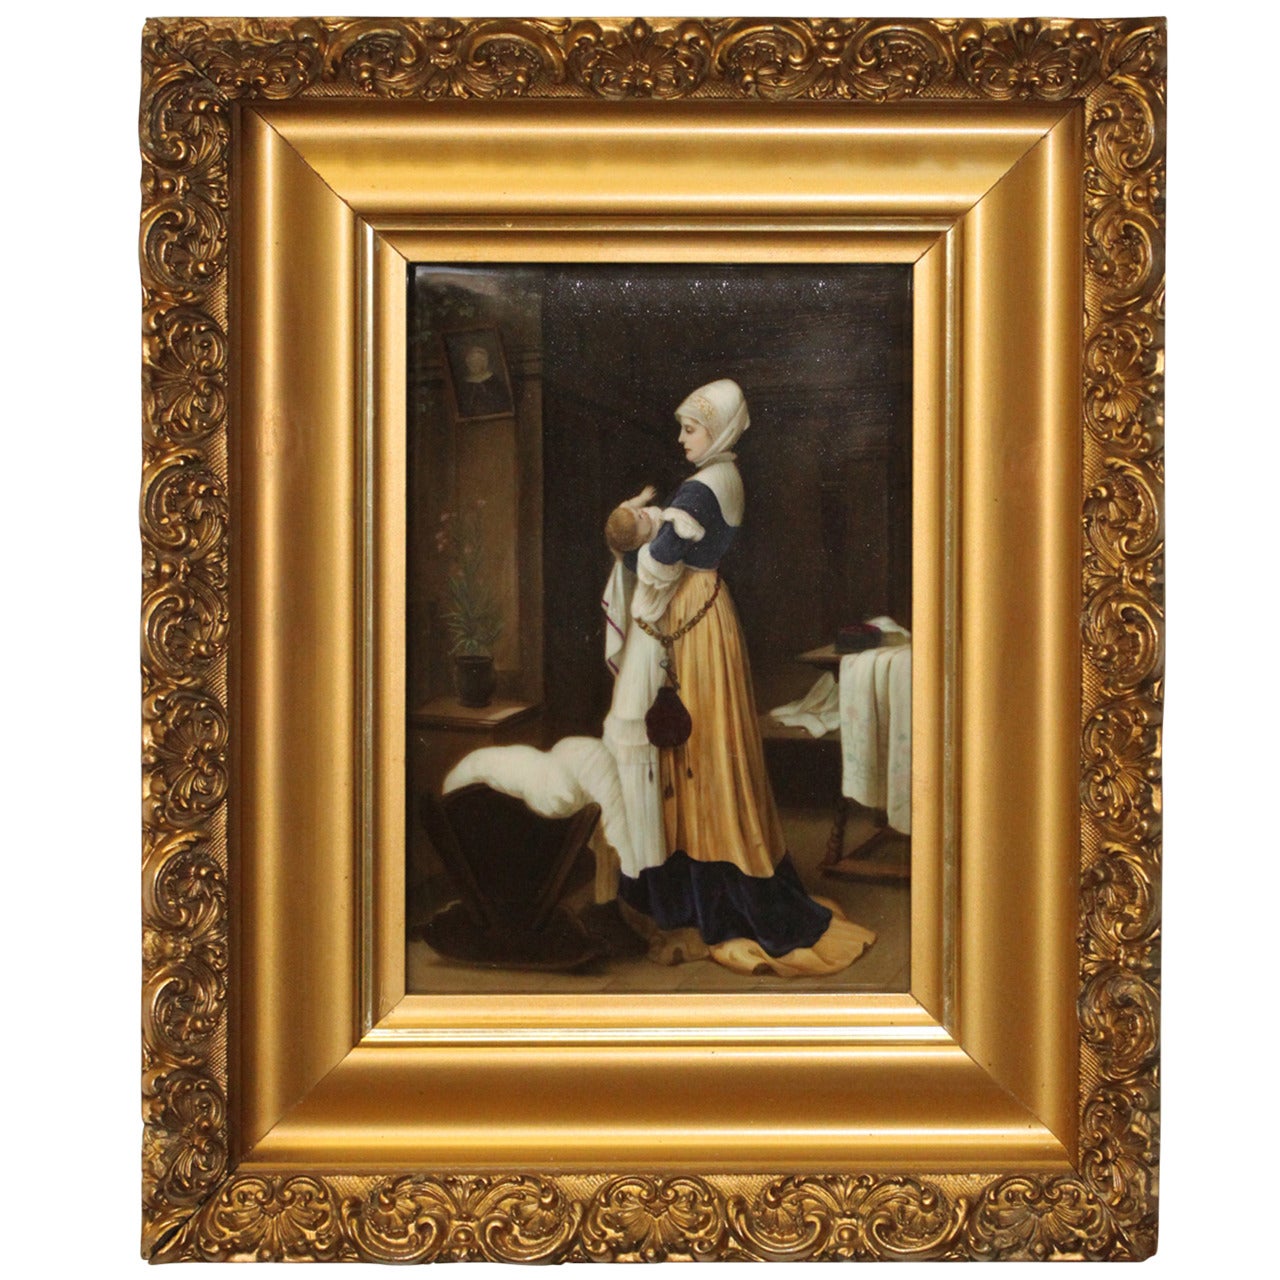 Mother and Child Painting in an Antique Gilt Frame